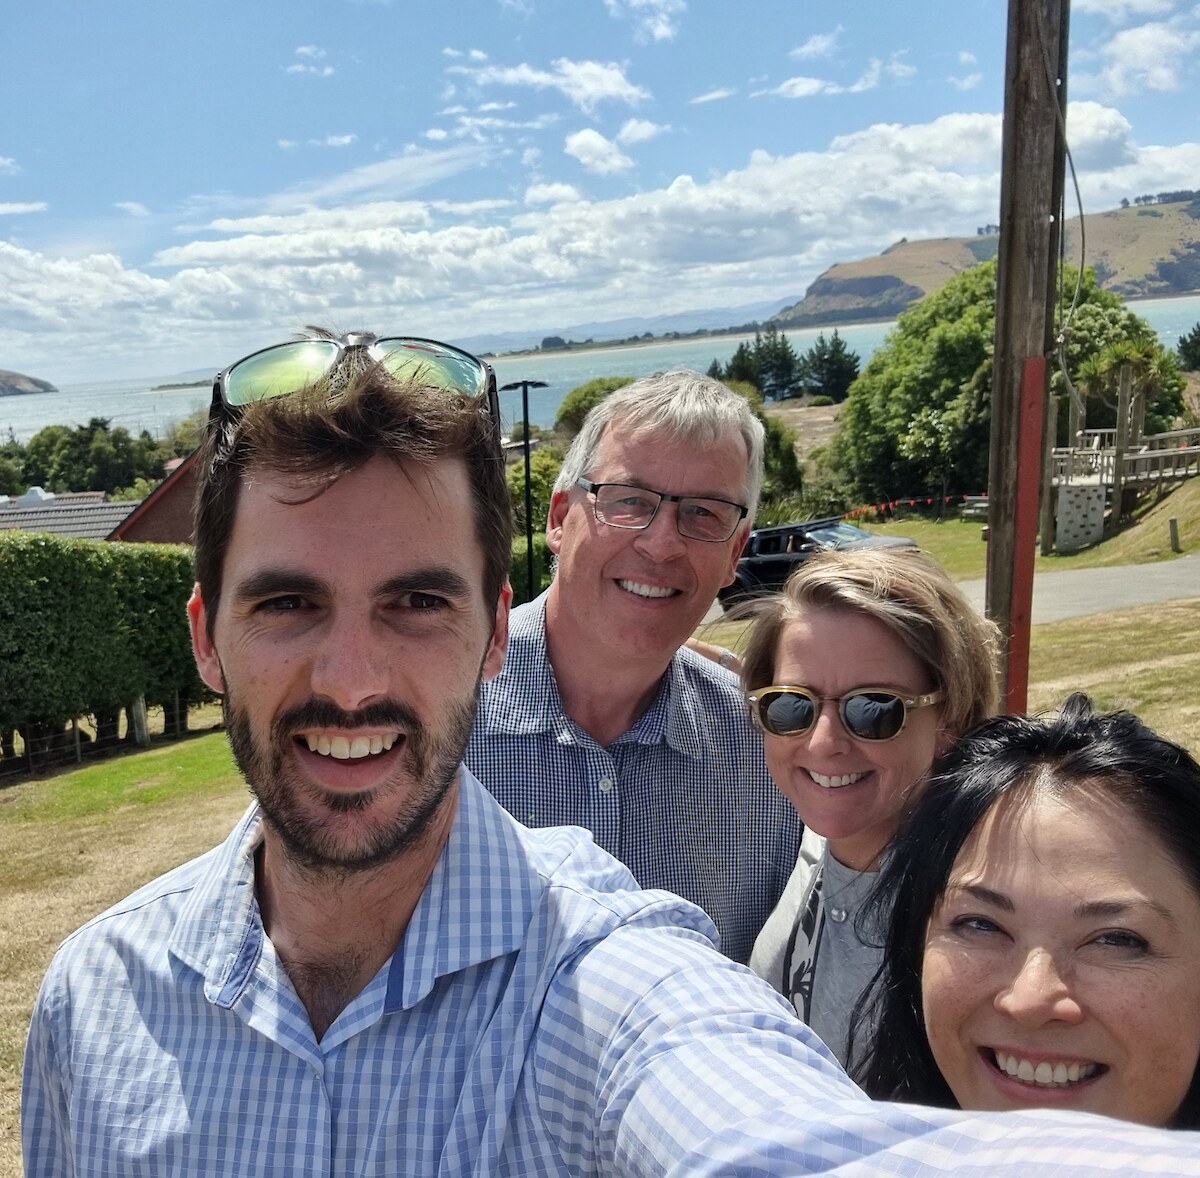 L-R: Kadin Lucas, Woodside Opportunity Lead New Zealand New Energy; Terry Nicholas, Murihiku Regeneration Portfolio Director and Upoko; Sophie Rowlands, Woodside New Energy External Affairs Manager; Ju-Lin O’Connor, Woodside Manager First Nations Relations.